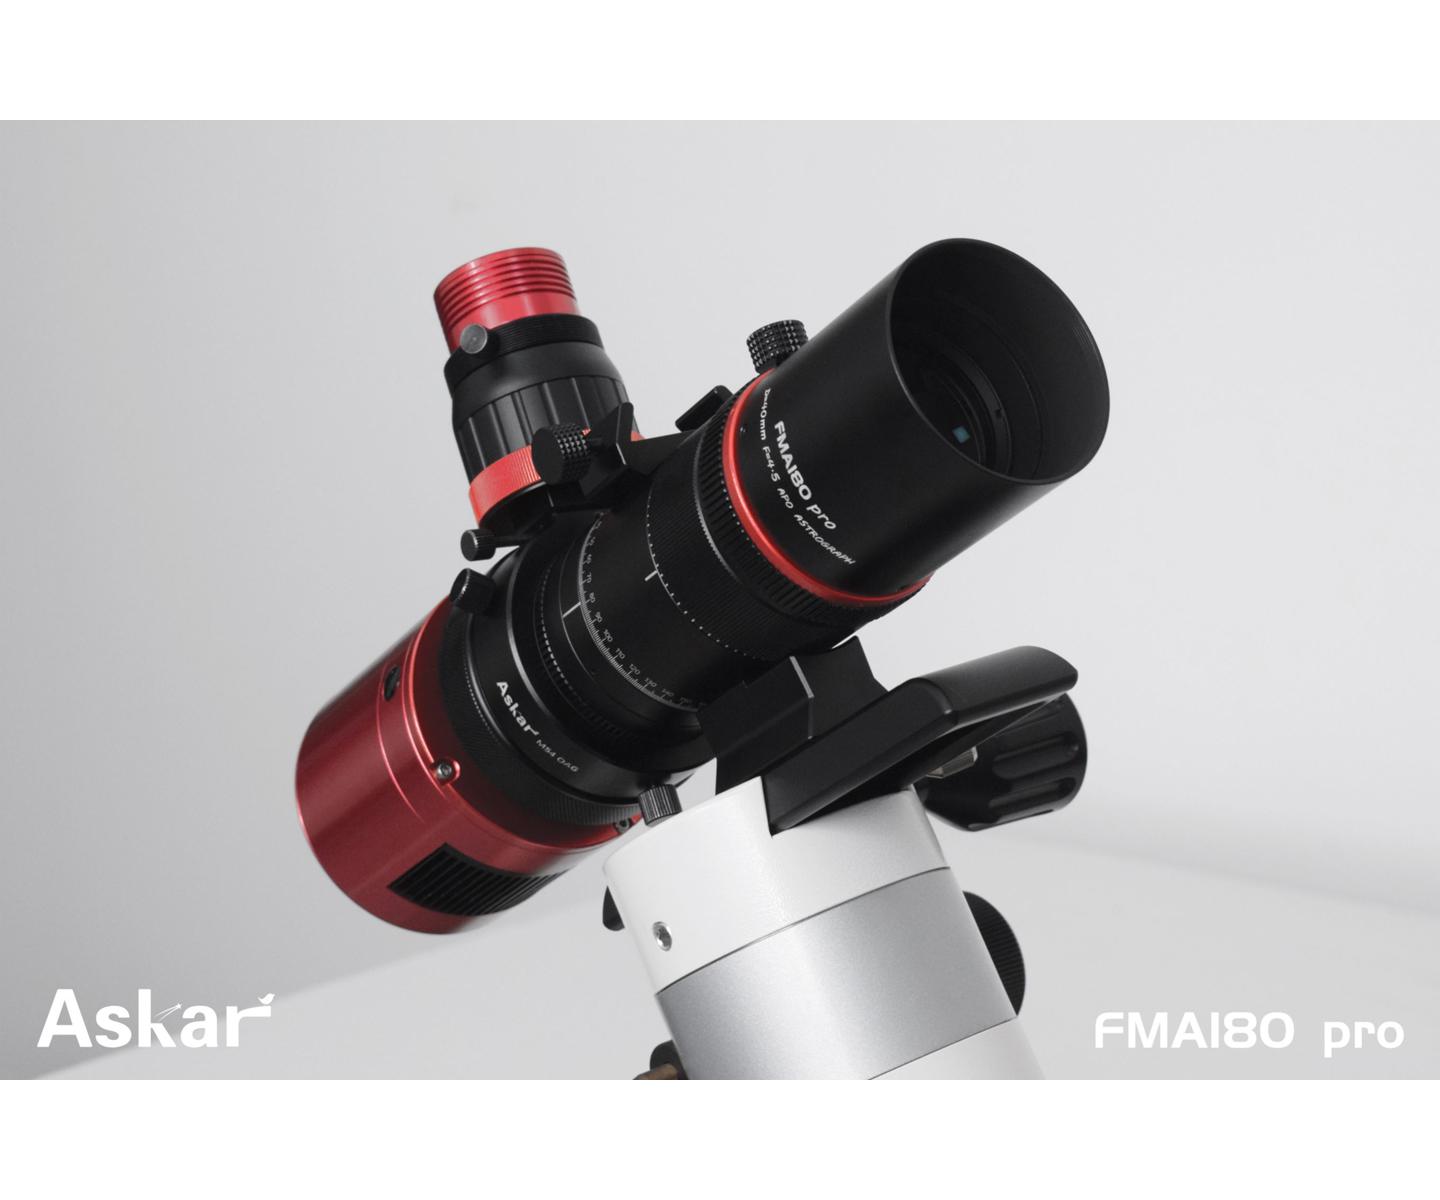  FMA180 pro is a compact astrograph for astrophotography with more integrated functions and a more dedicated design. [EN] 